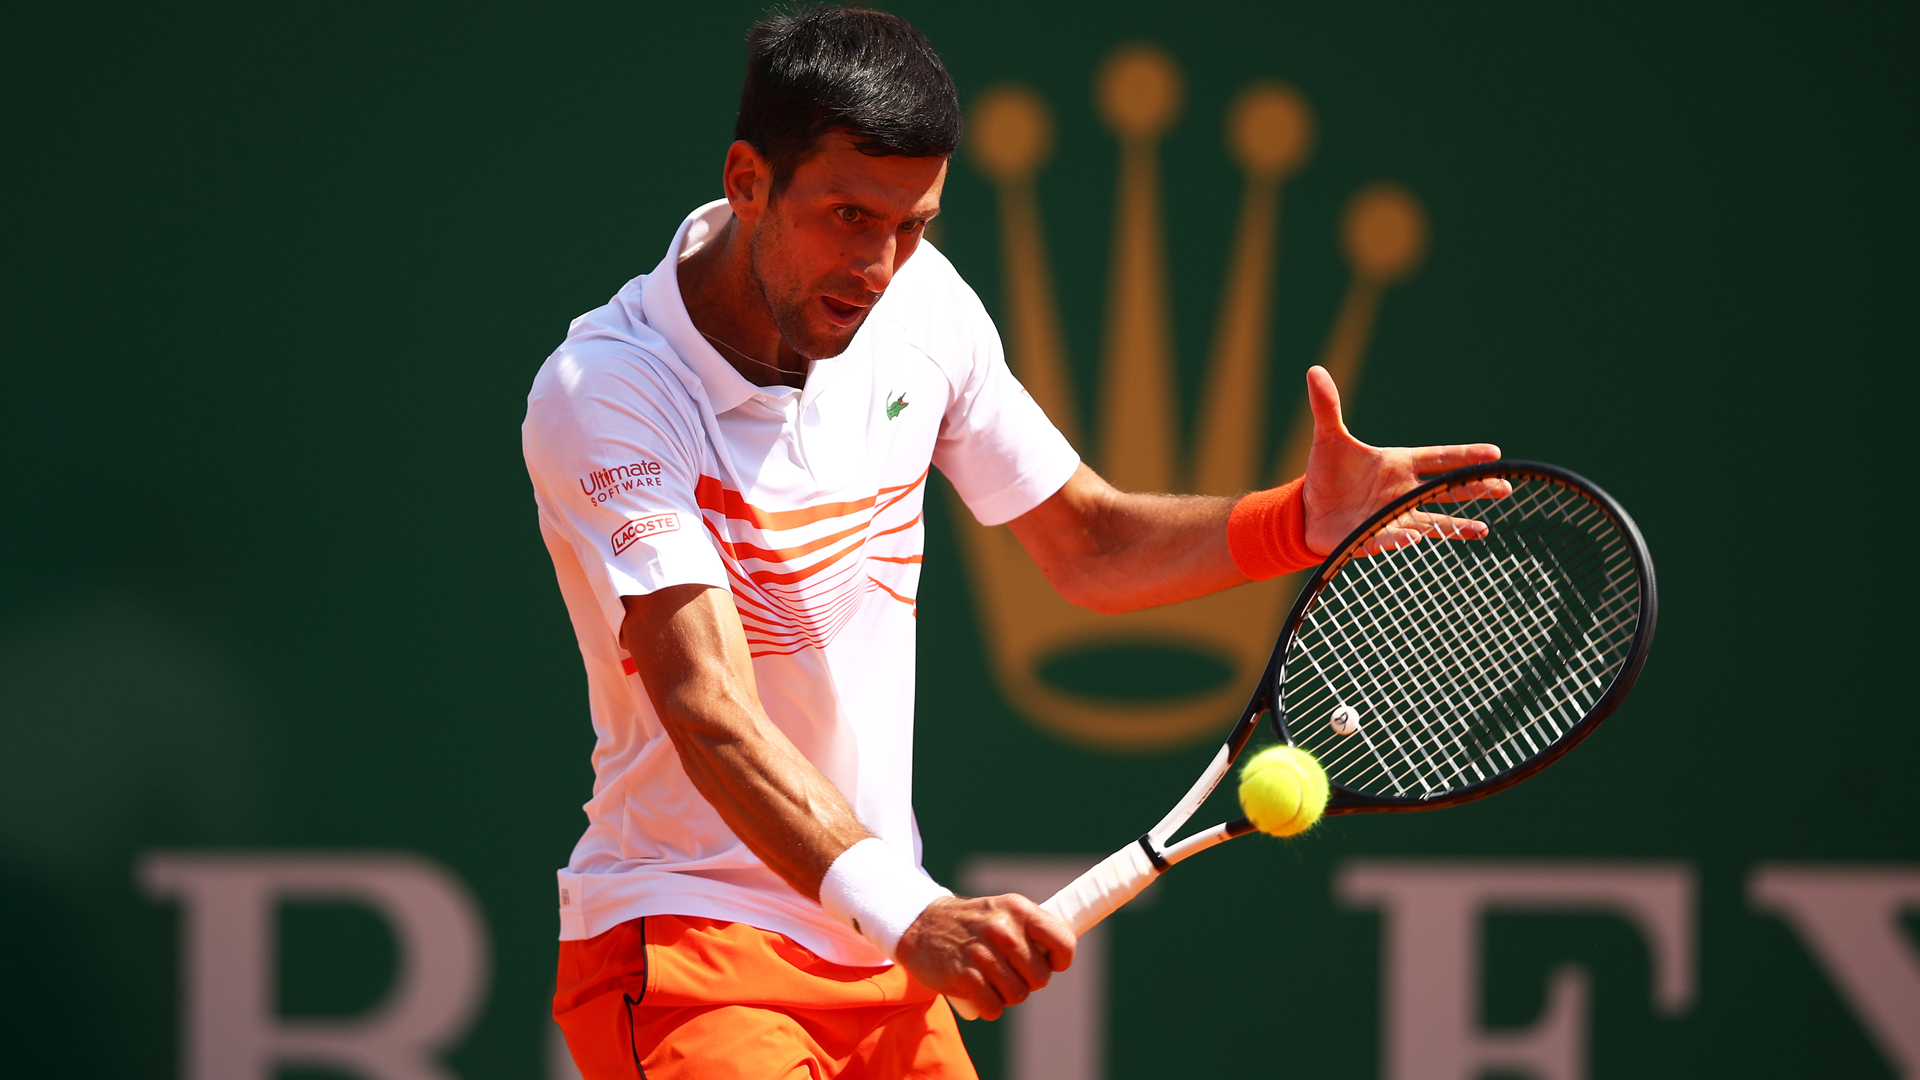 Despite a dip in form, Novak Djokovic remains confident he can get back to his best ahead of the French Open.